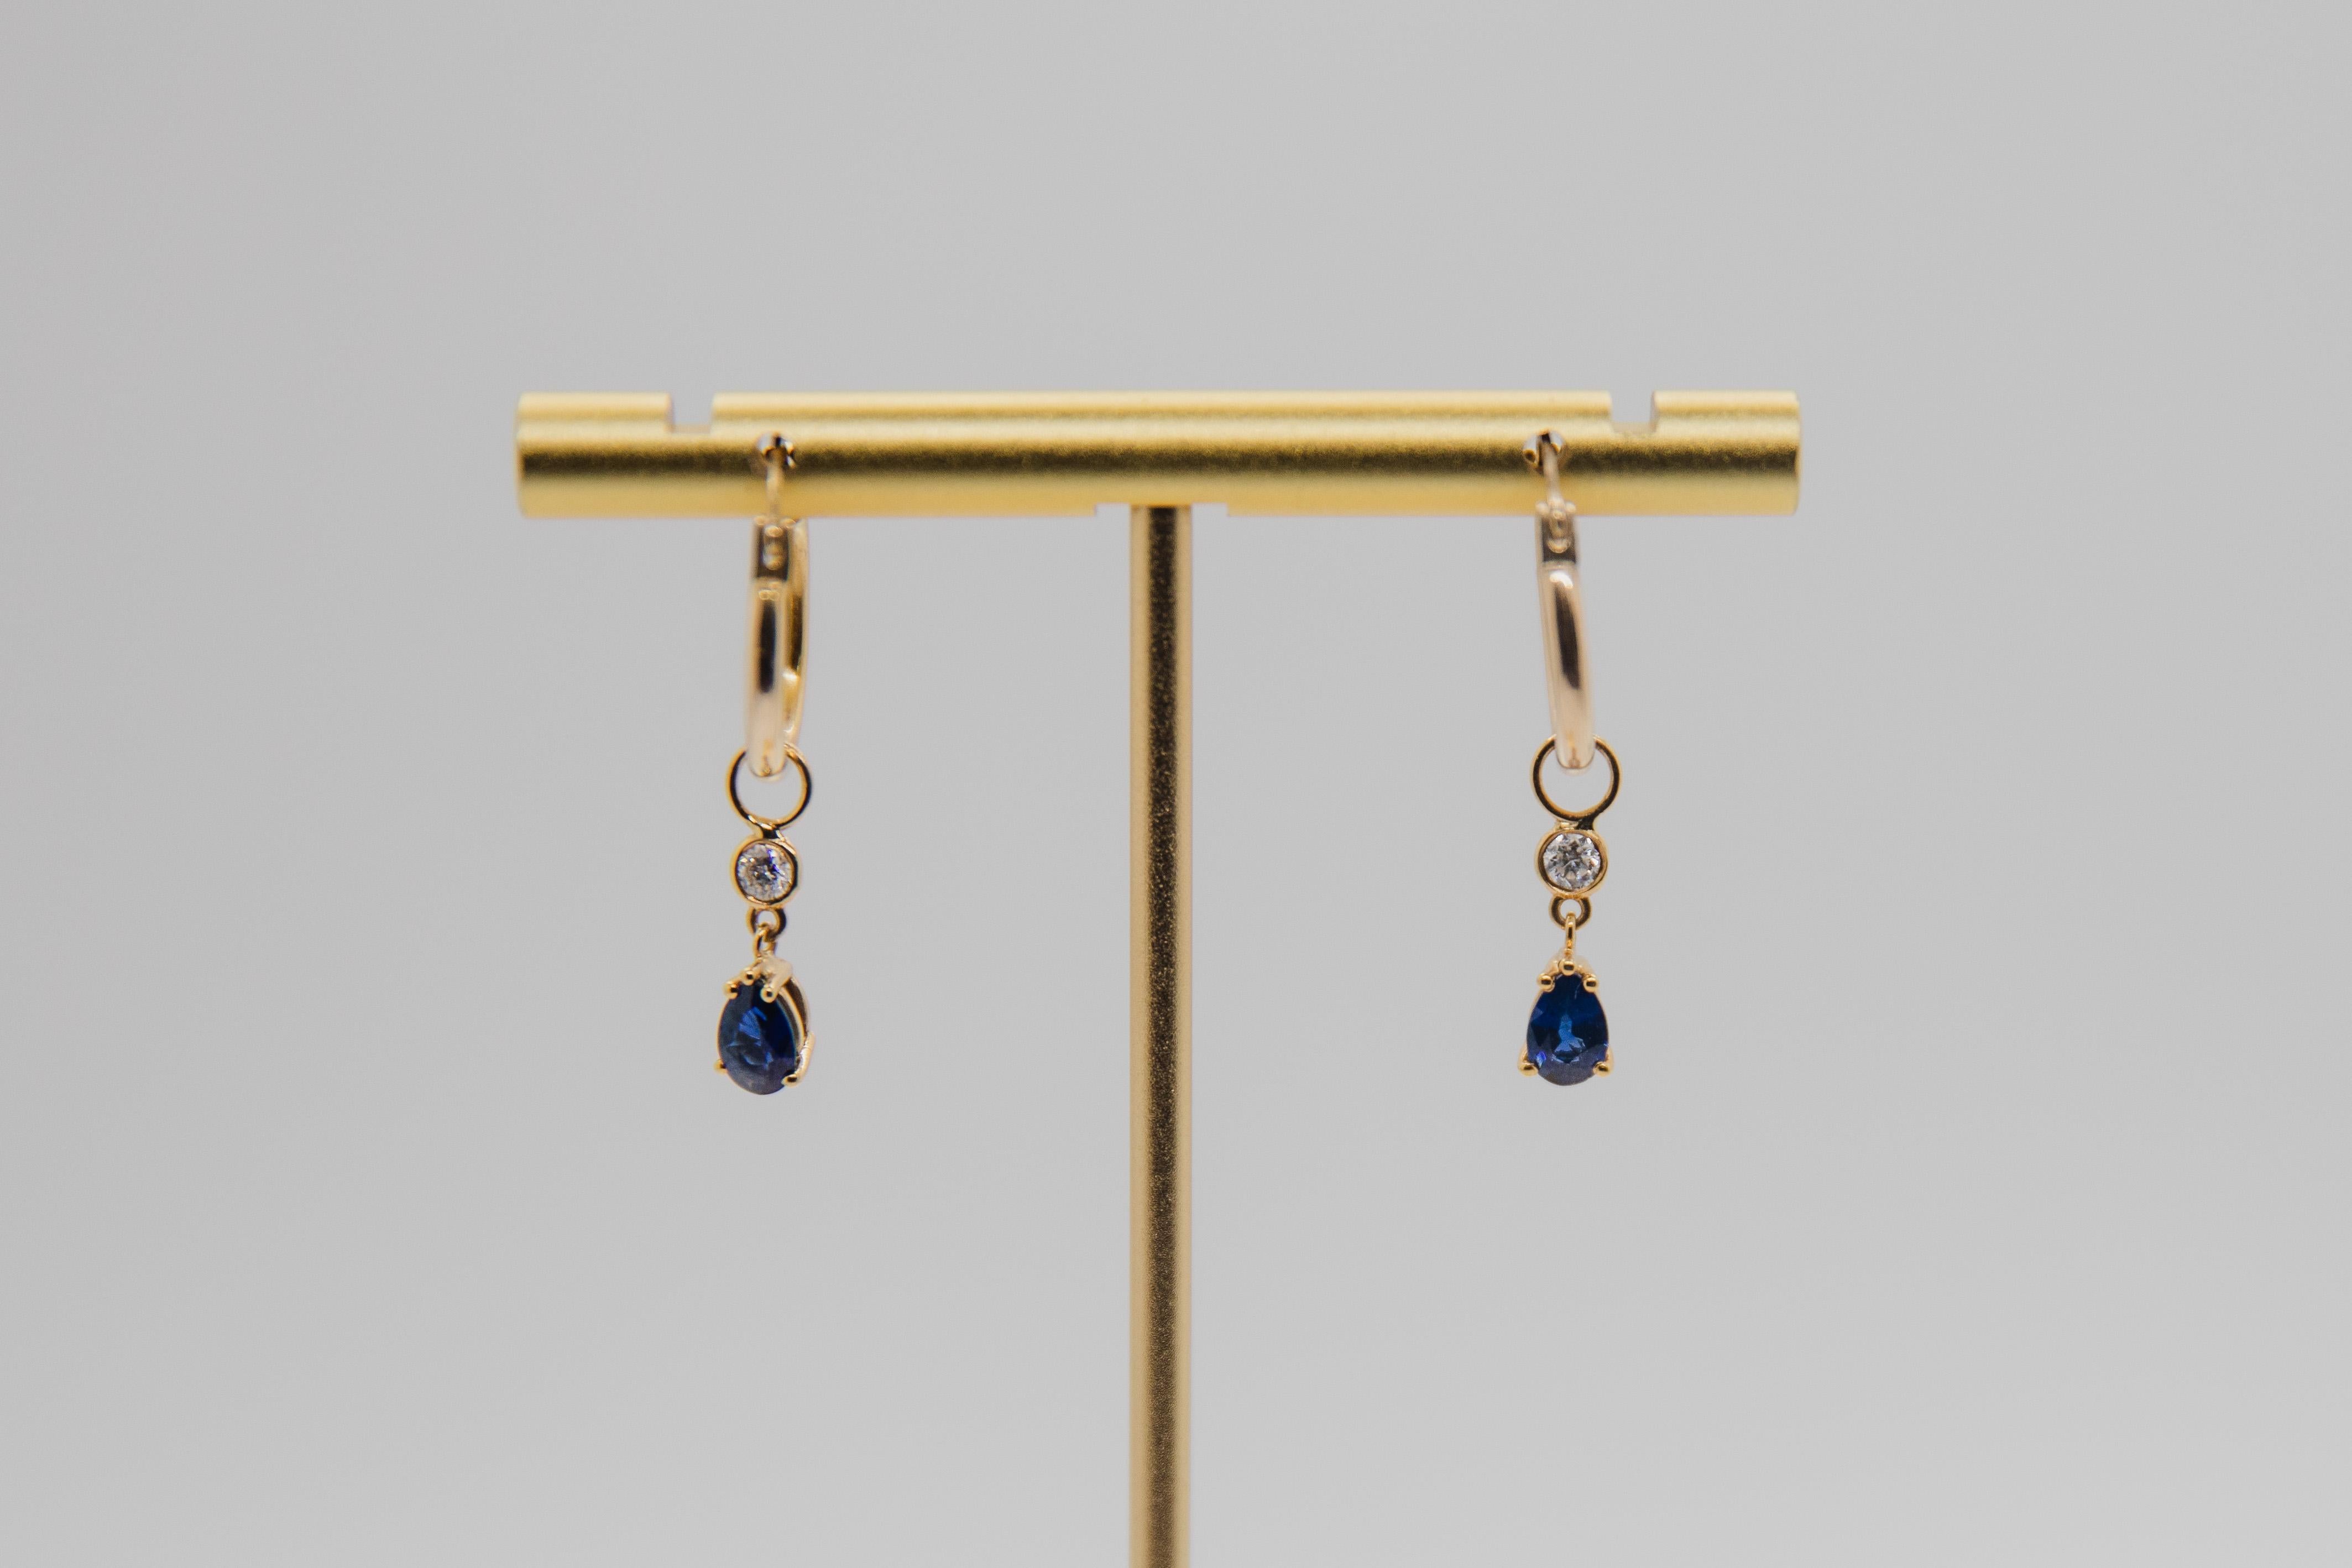 Modern Detachable 1.20 Carat Sapphire and Diamond Charm Earring with Hoop Earring For Sale